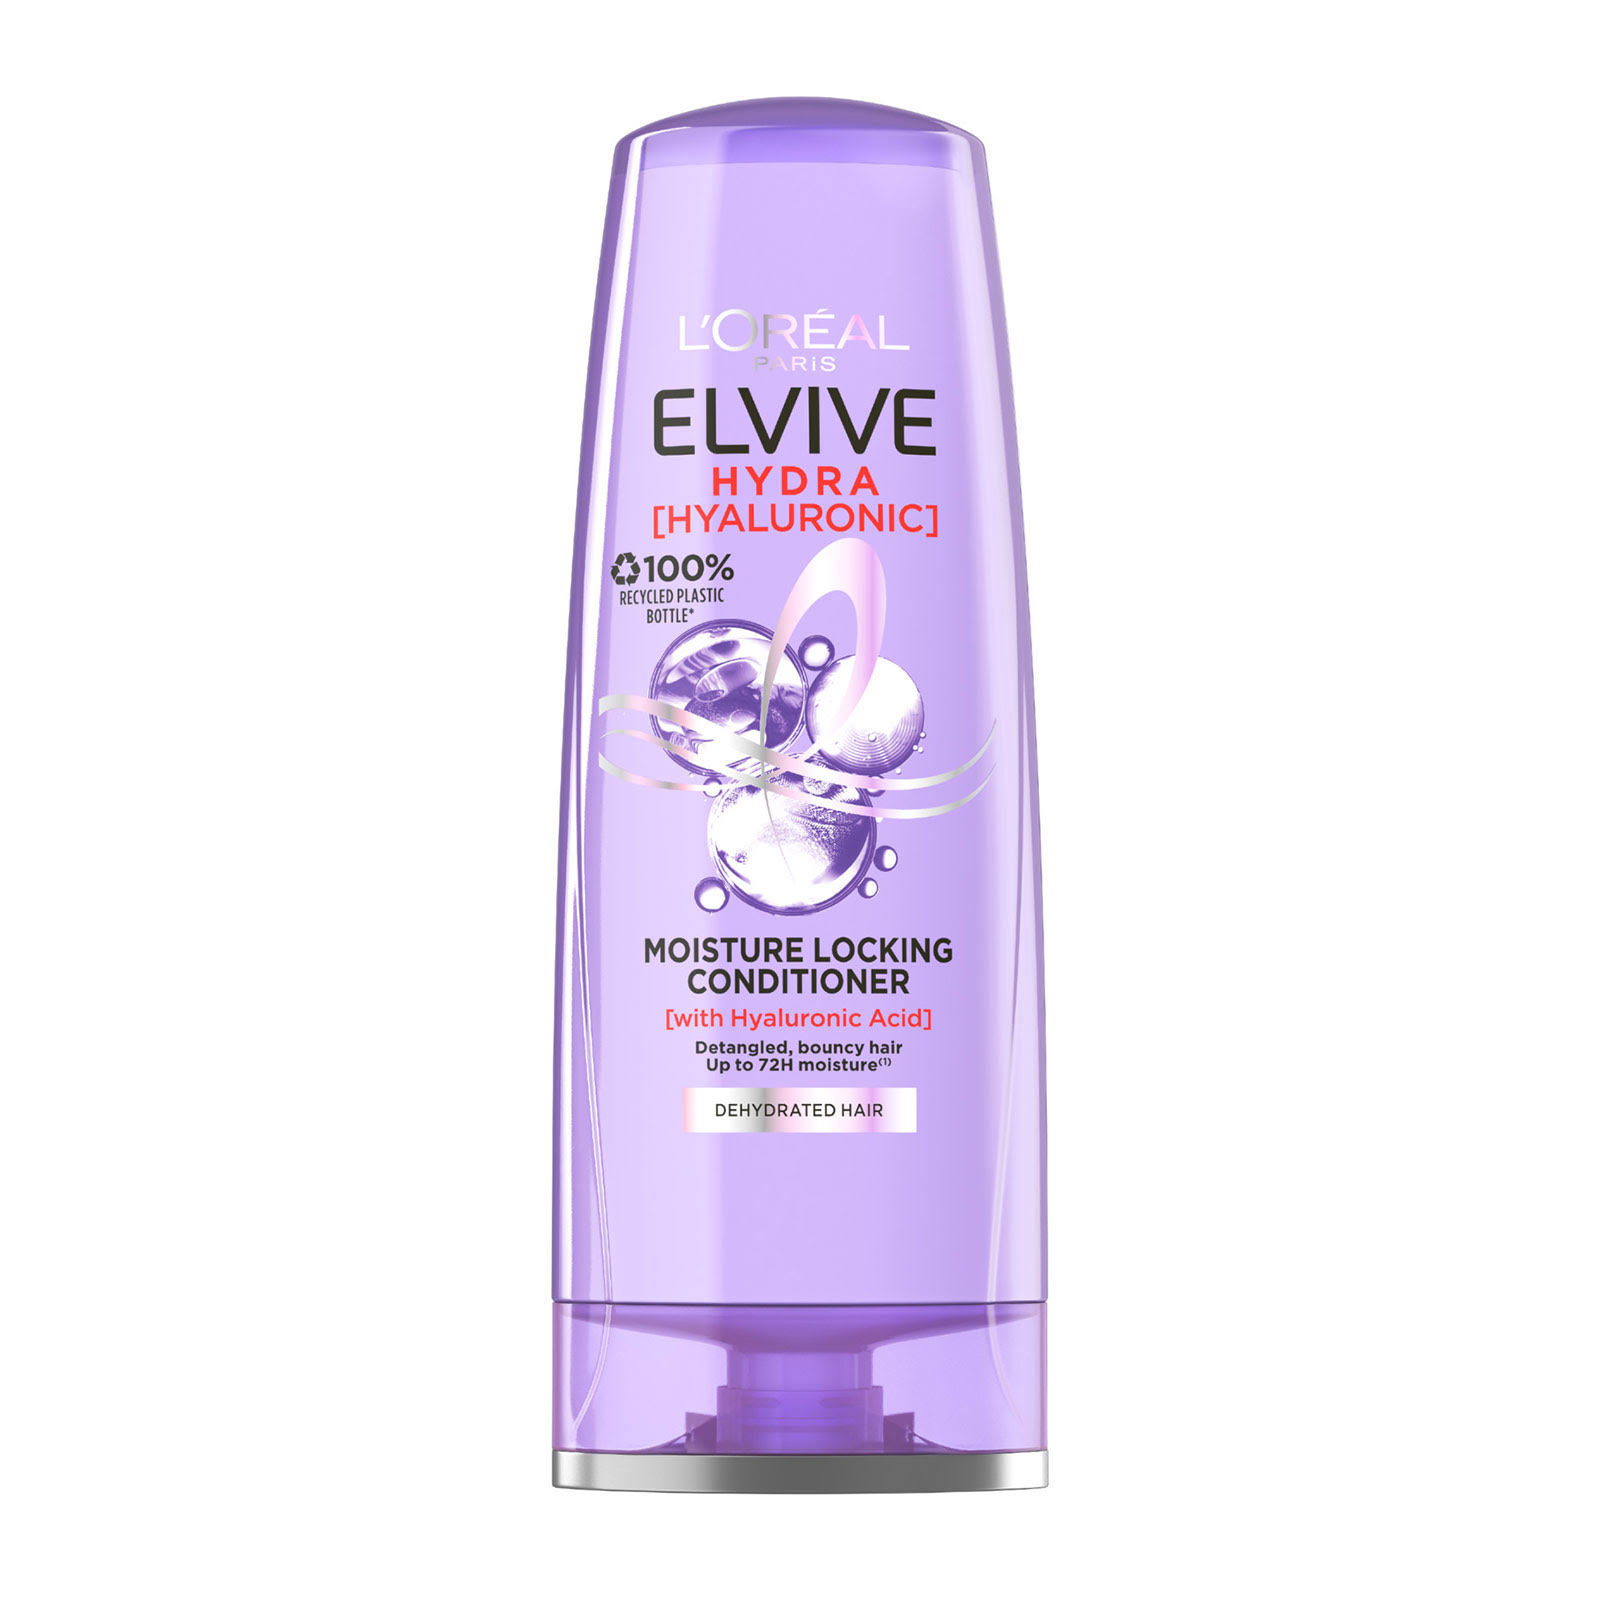 L'Oreal Elvive Hydra Hyaluronic Acid Conditioner 400ml